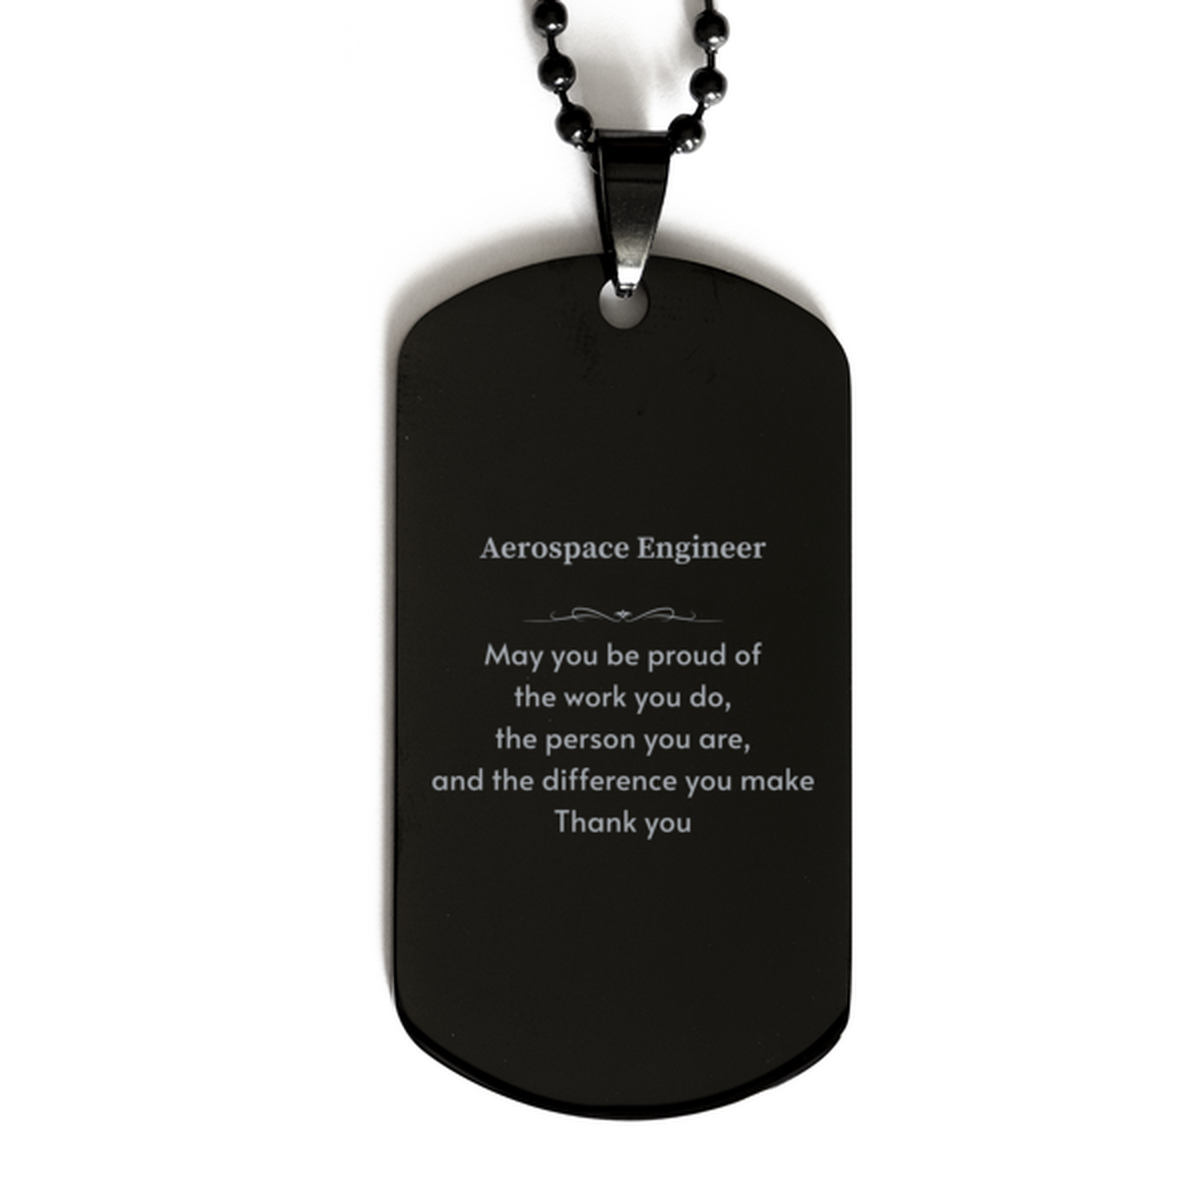 Heartwarming Black Dog Tag Retirement Coworkers Gifts for Aerospace Engineer, Aerospace Engineer May You be proud of the work you do, the person you are Gifts for Boss Men Women Friends